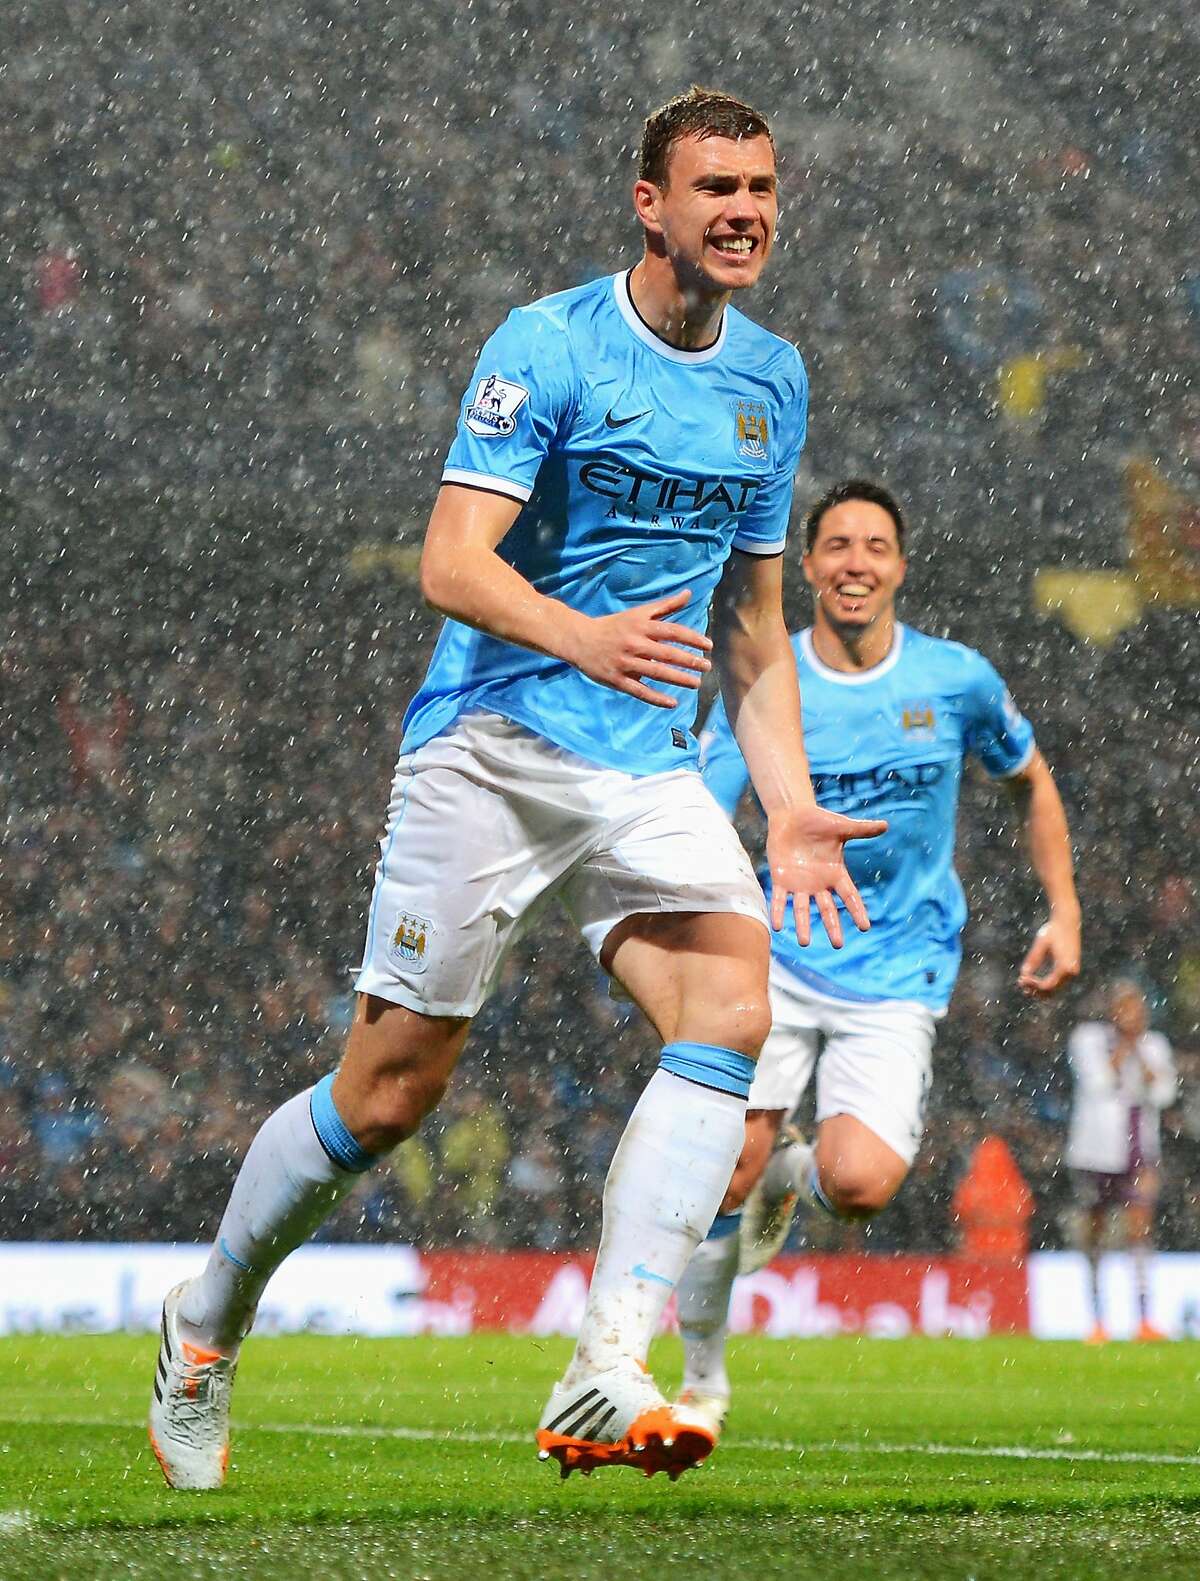 MANCHESTER, ENGLAND - MAY 07: Edin Dzeko of Manchester City celebrates scoring the opening goal during the Barclays Premier League match between Manchester City and Aston Villa at Etihad Stadium on May 7, 2014 in Manchester, England. (Photo by Michael Regan/Getty Images)